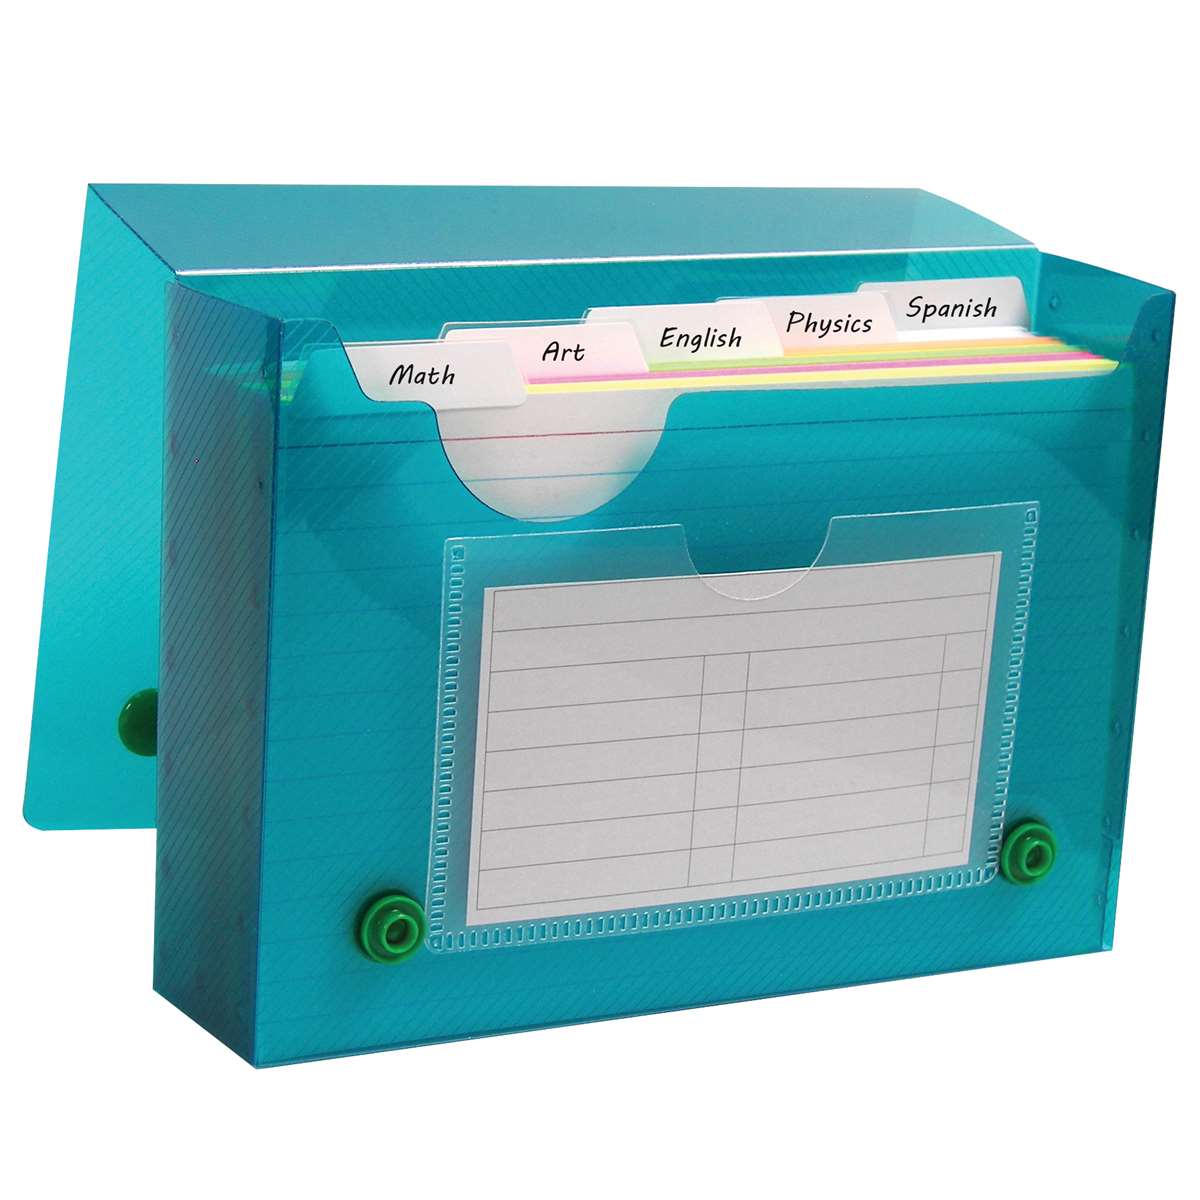 3X5 Index Card Case by C-Line: Index Cards